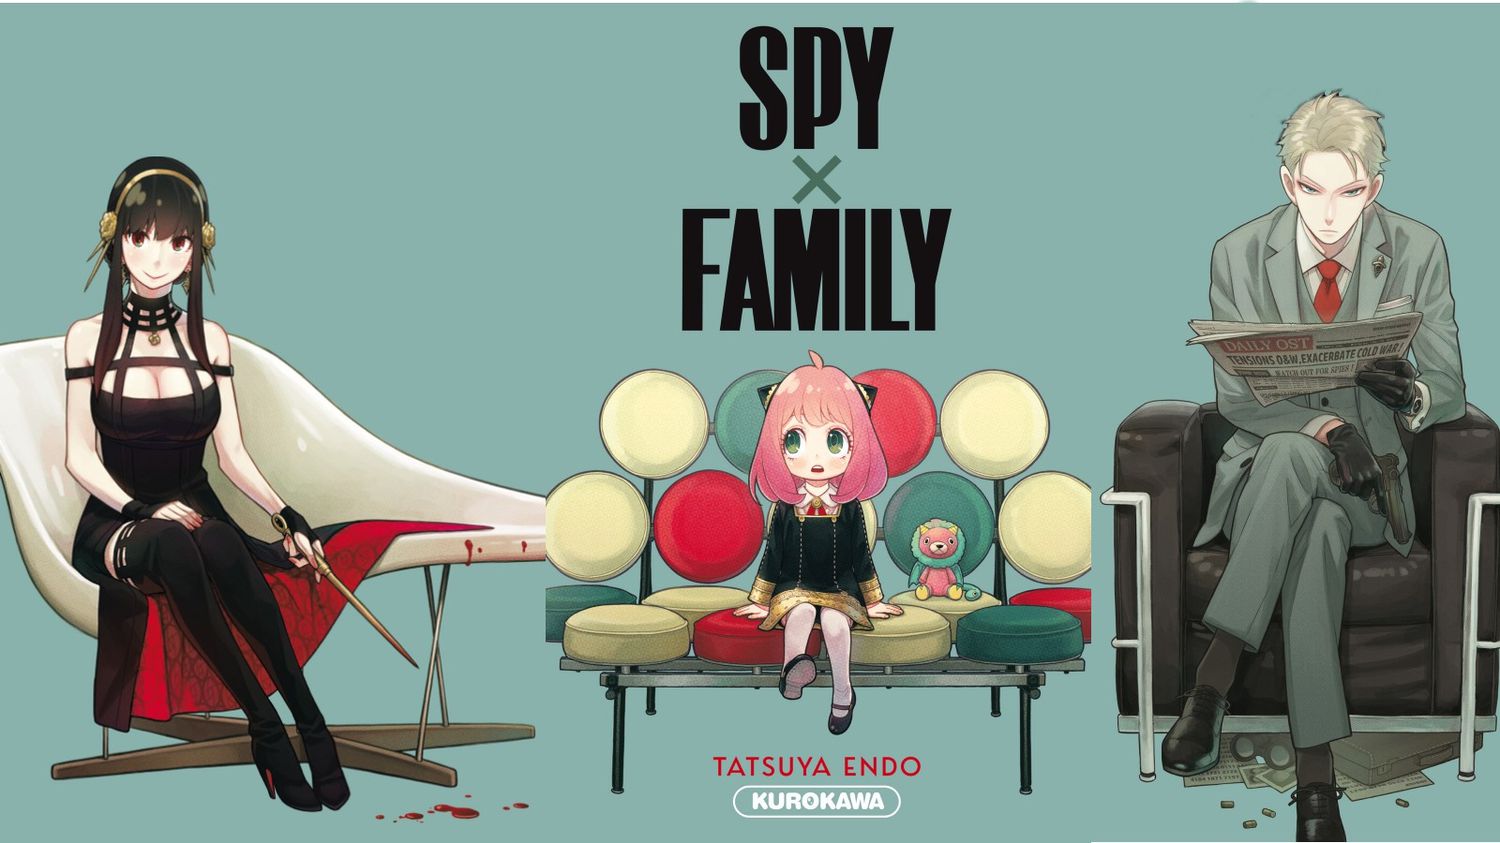 Spy x Family": more than a million manga sold in France, the release of the  anime in April 2022